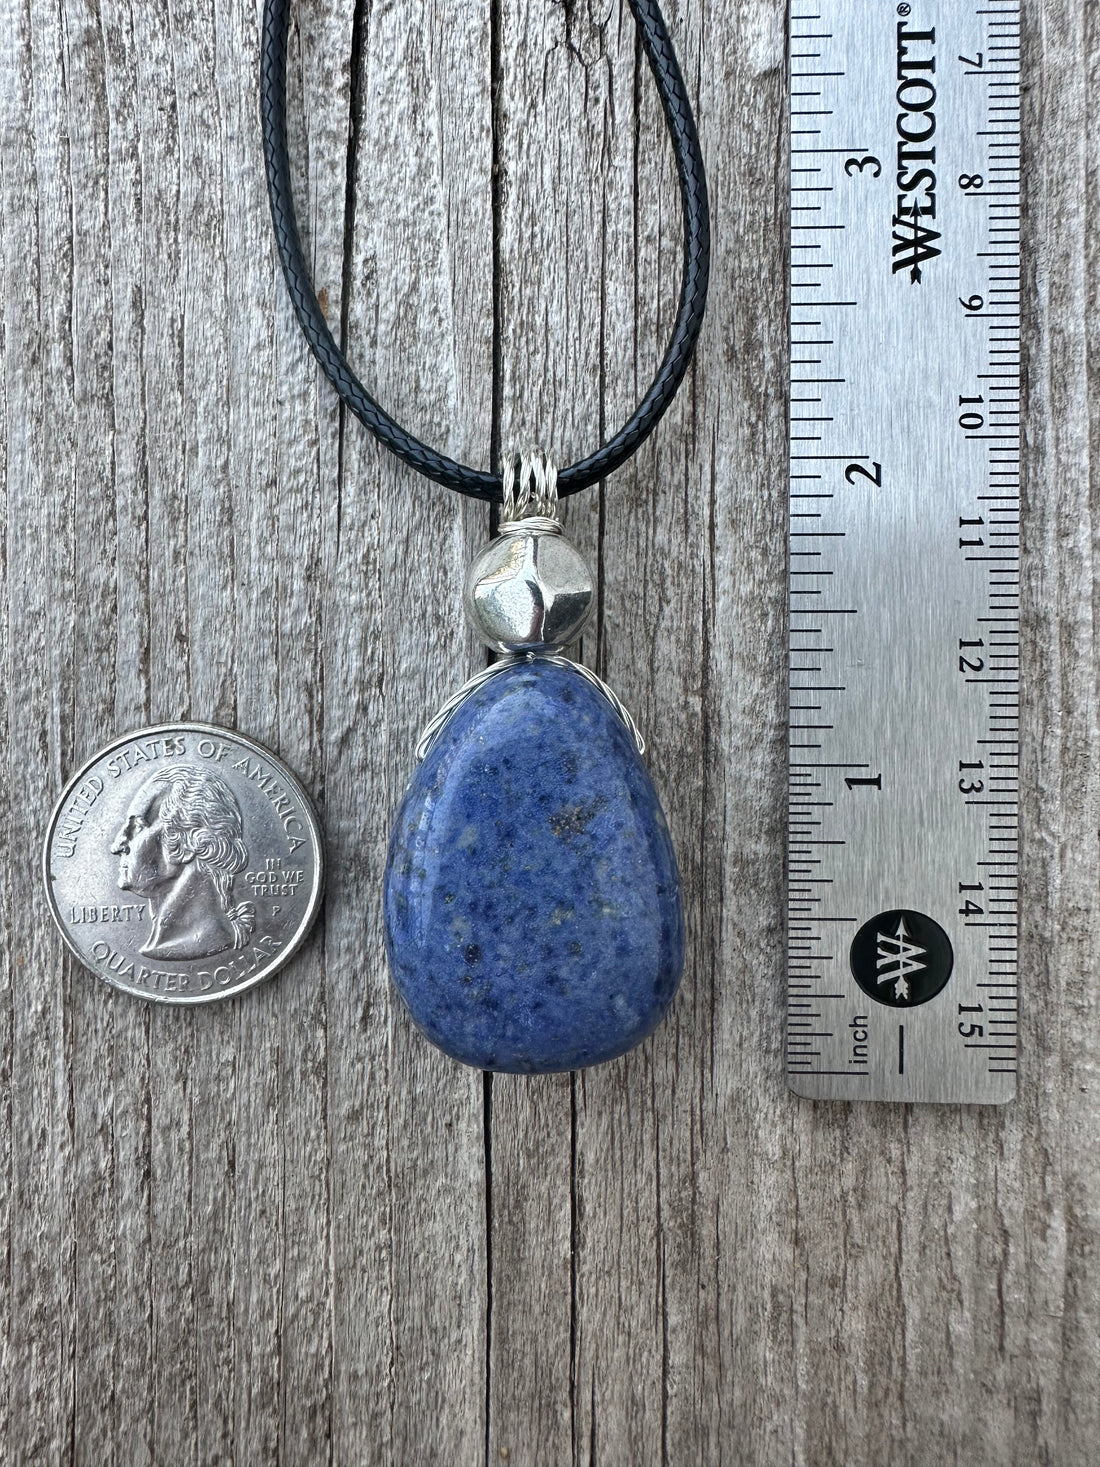 Dumortierite Pendant for Bringing Synchronization to Further Your Dreams. Swirl Signifies Consciousness